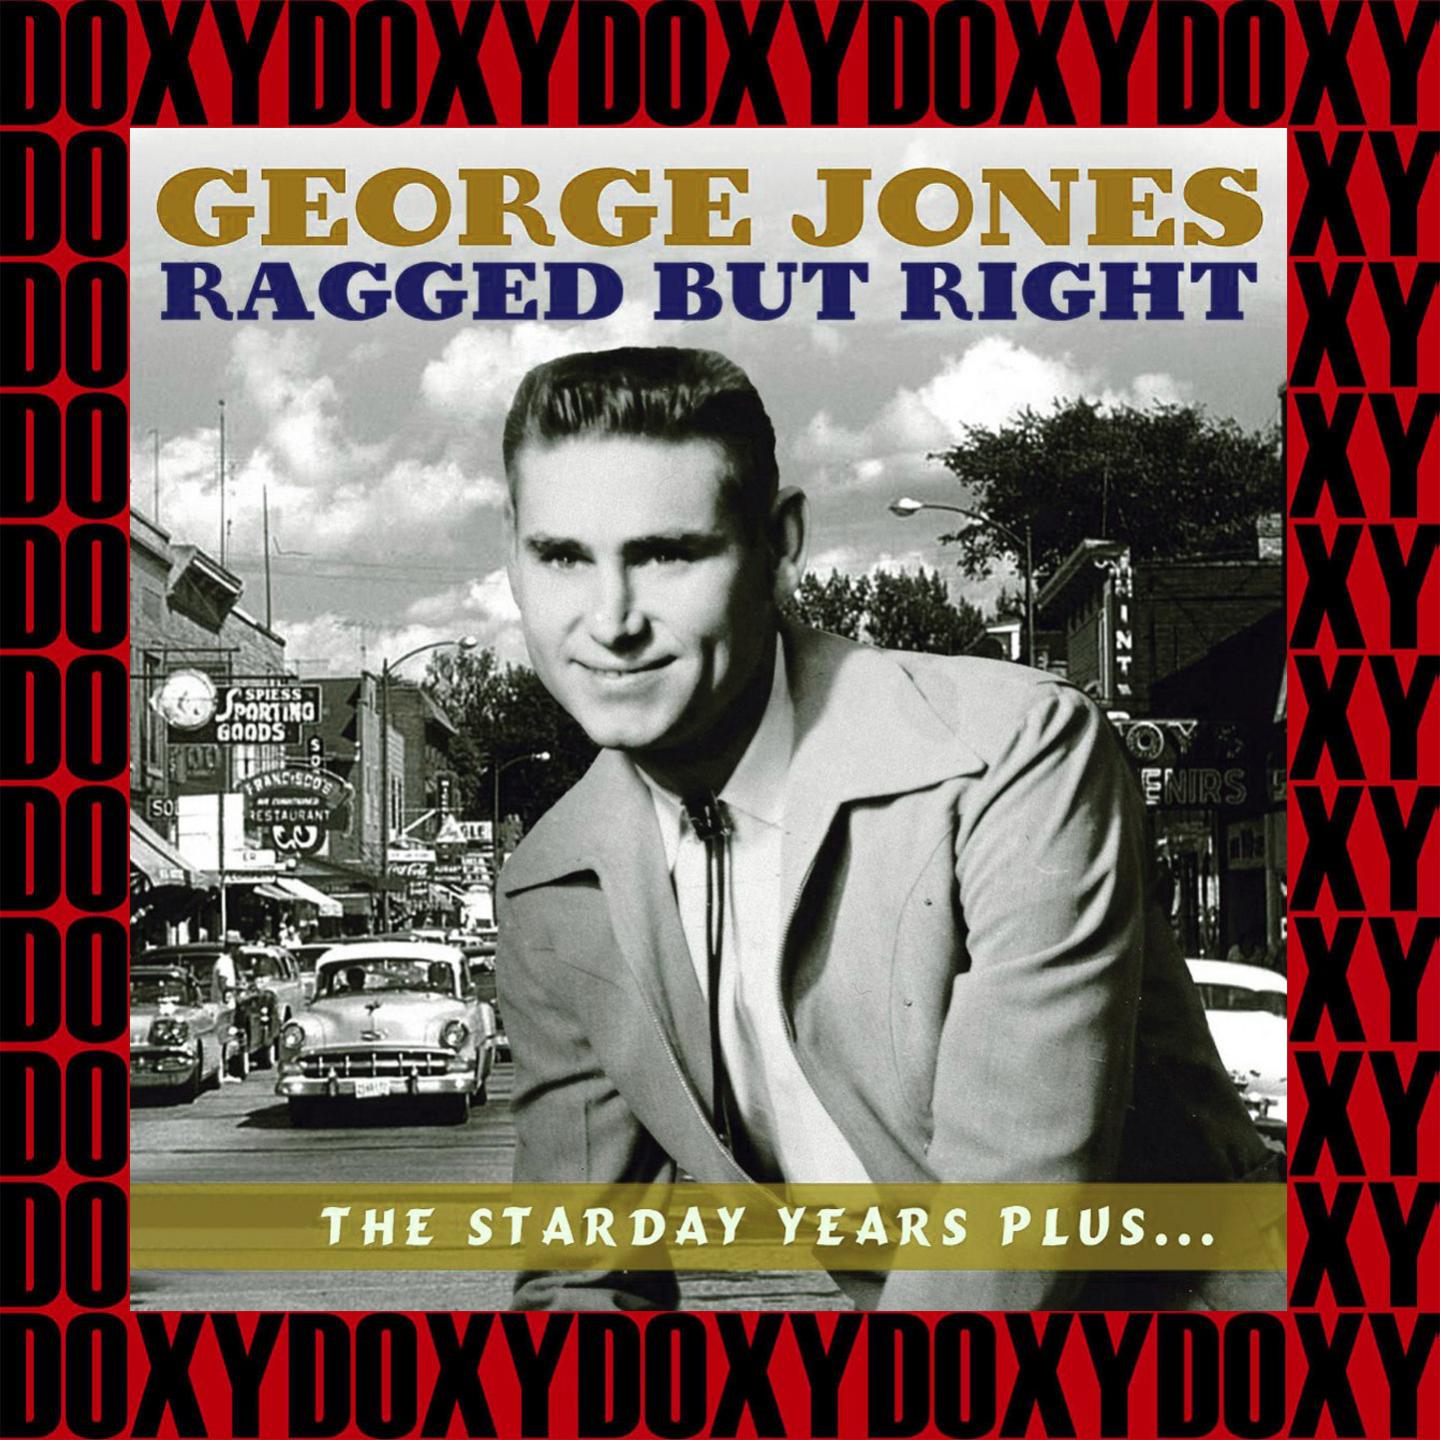 Ragged But Right: The Starday Years Plus..., Vol.3 (Remastered Version) (Doxy Collection)